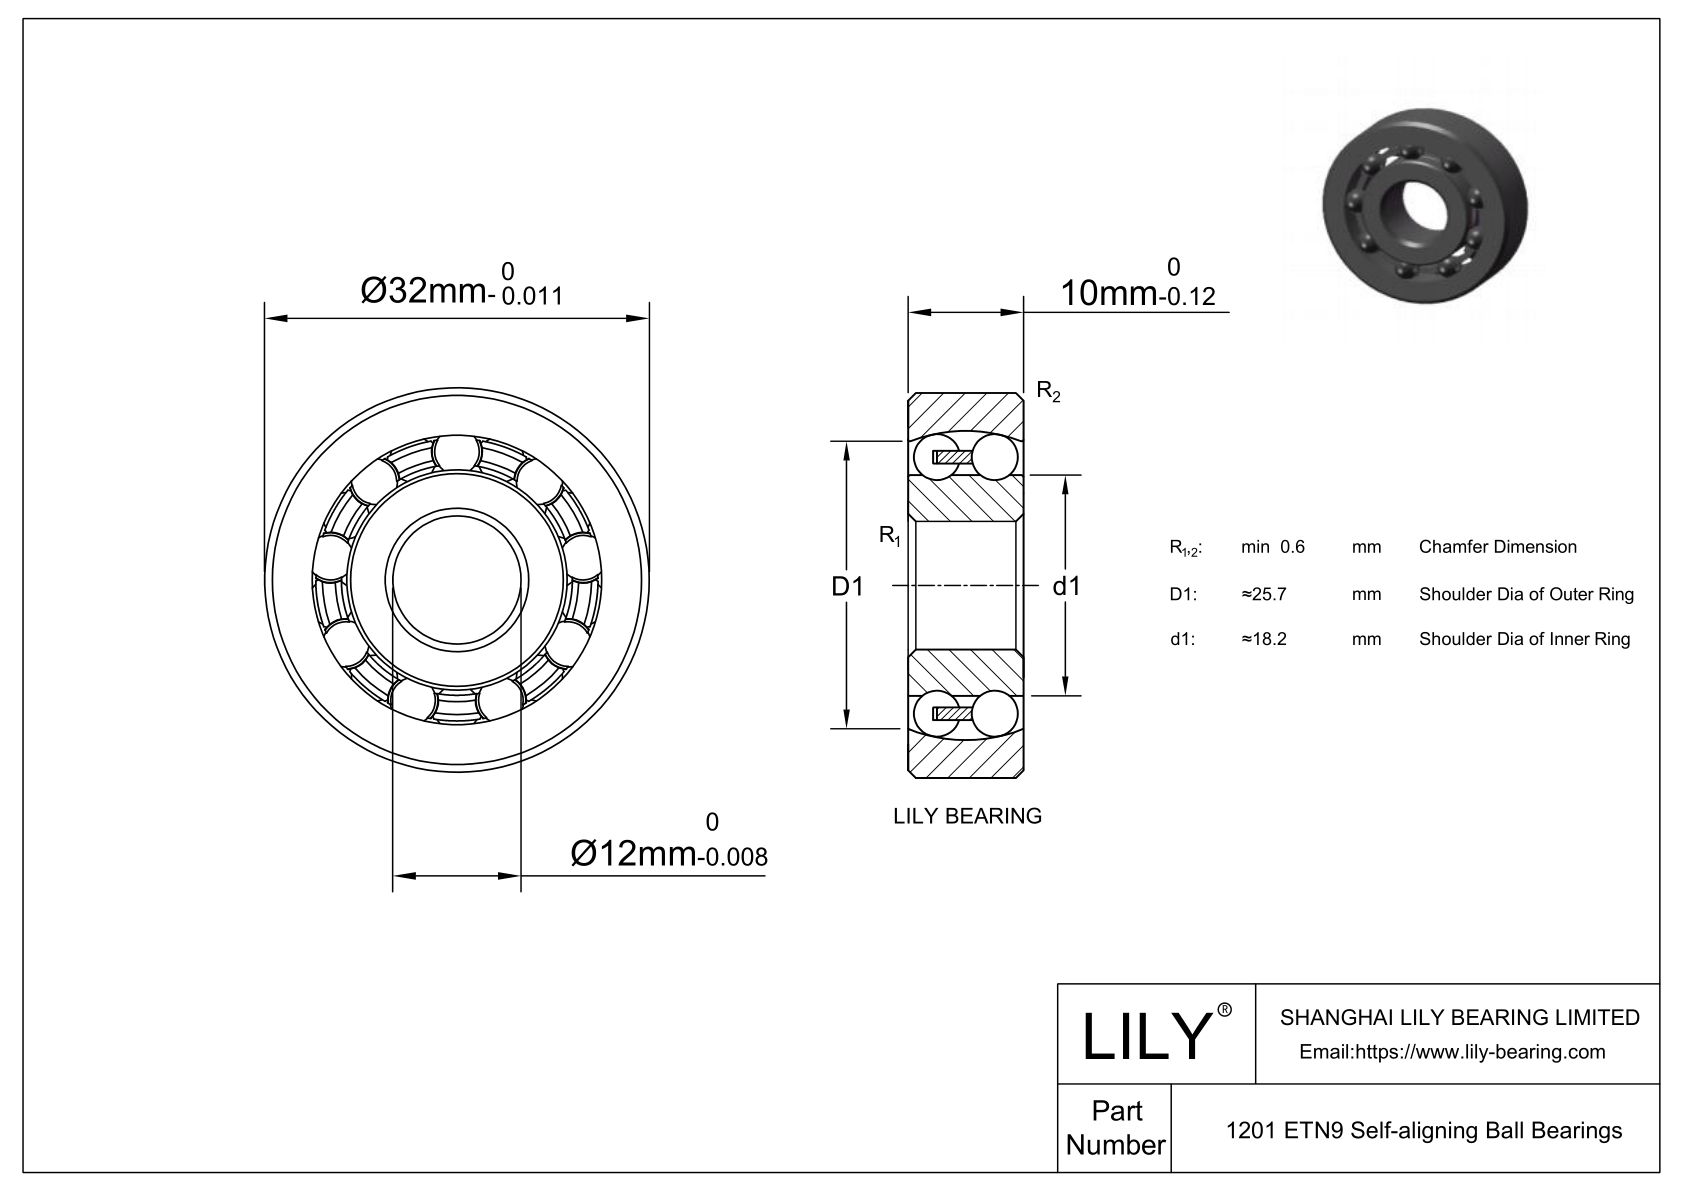 CE1201SI Silicon Nitride Self Aligning Ball Bearings cad drawing